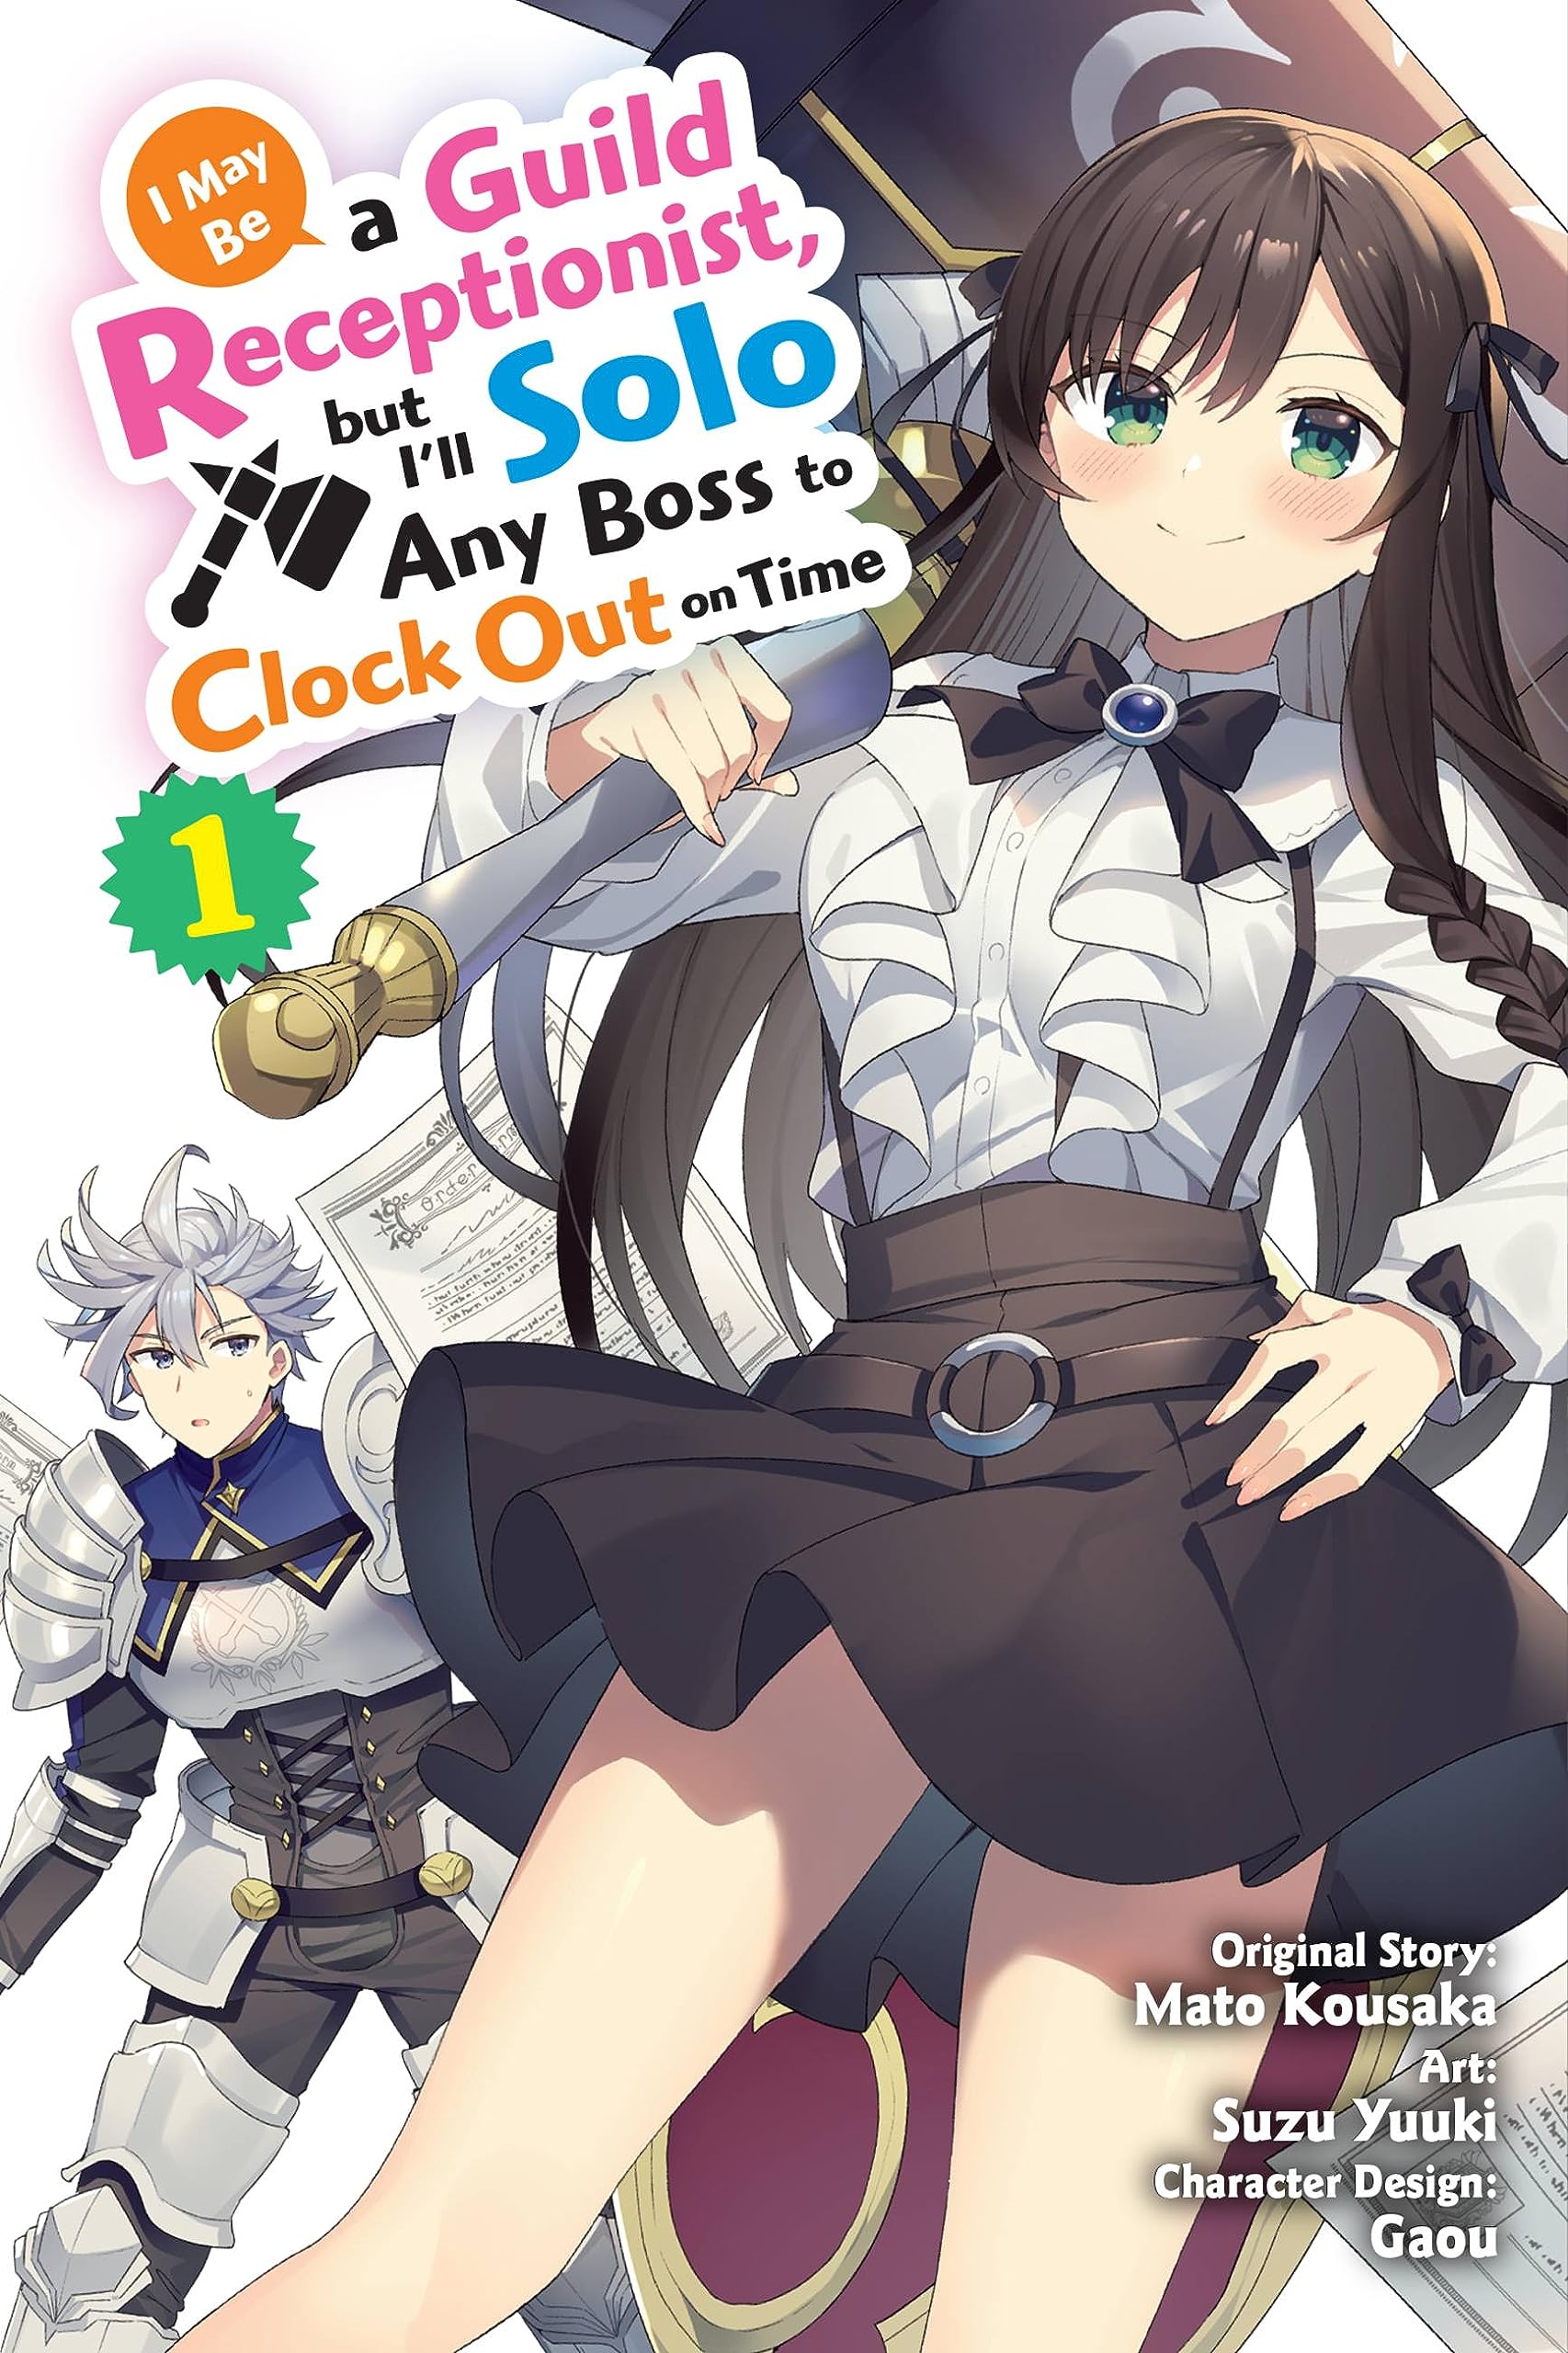 I May Be a Guild Receptionist, But I'll Solo Any Boss to Clock Out on Time (Manga) Vol. 01